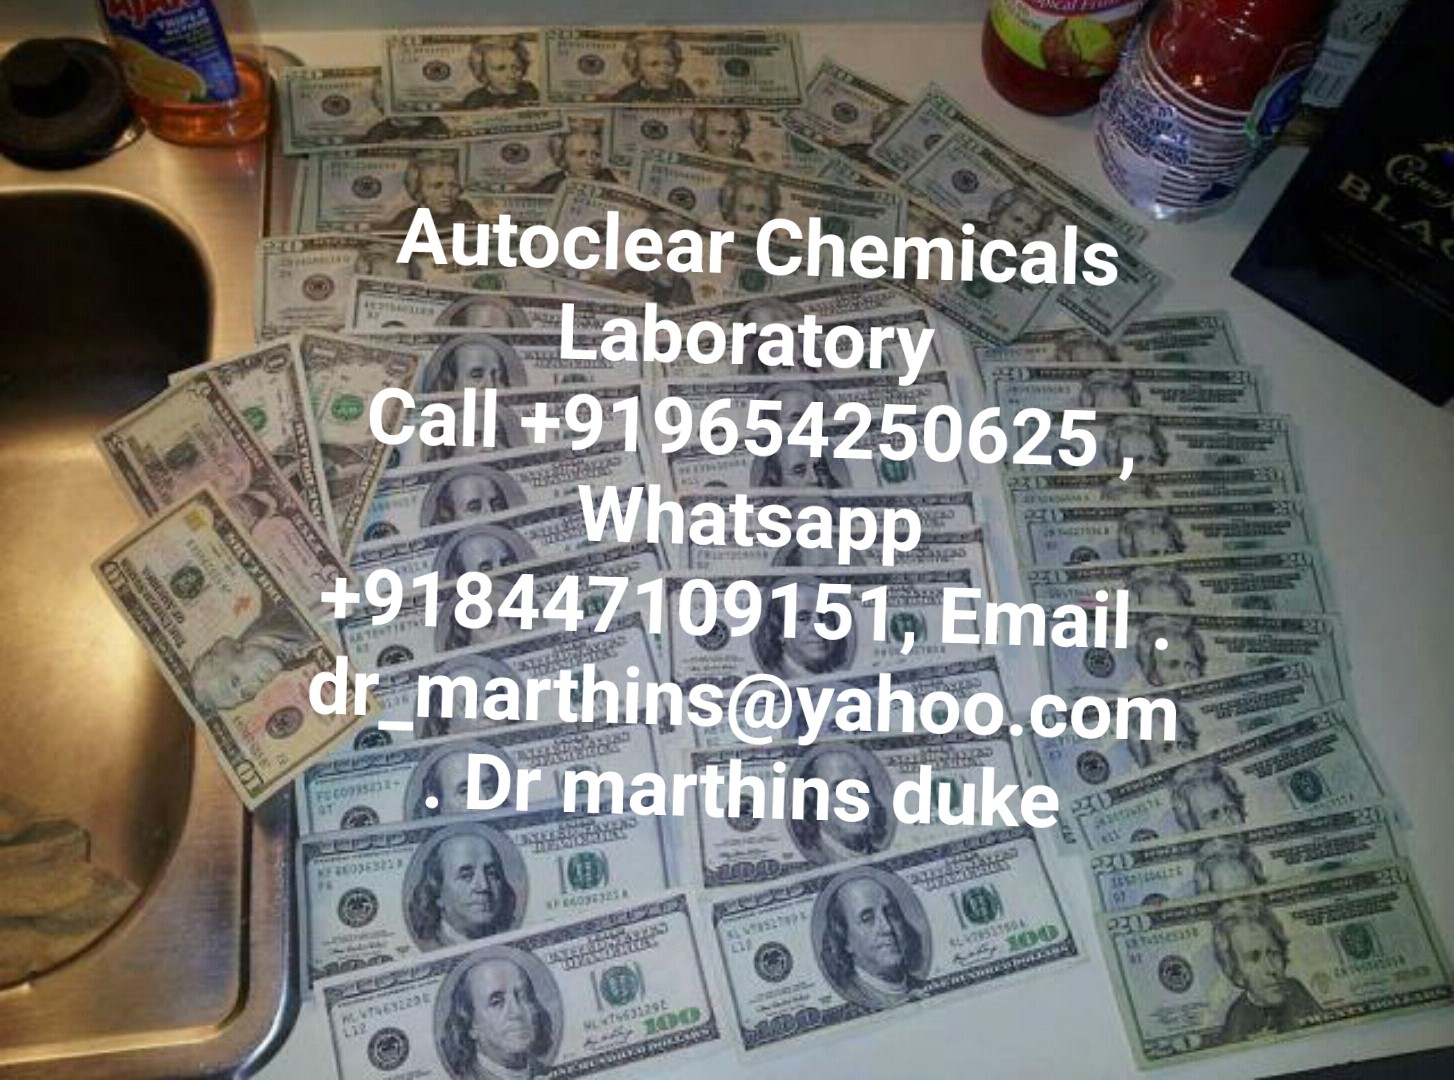 BLACK MONEY CLEANING CHEMICALS SSD SOLUTION AUTOMATIC AND MACHINE/ Call  +918447109151